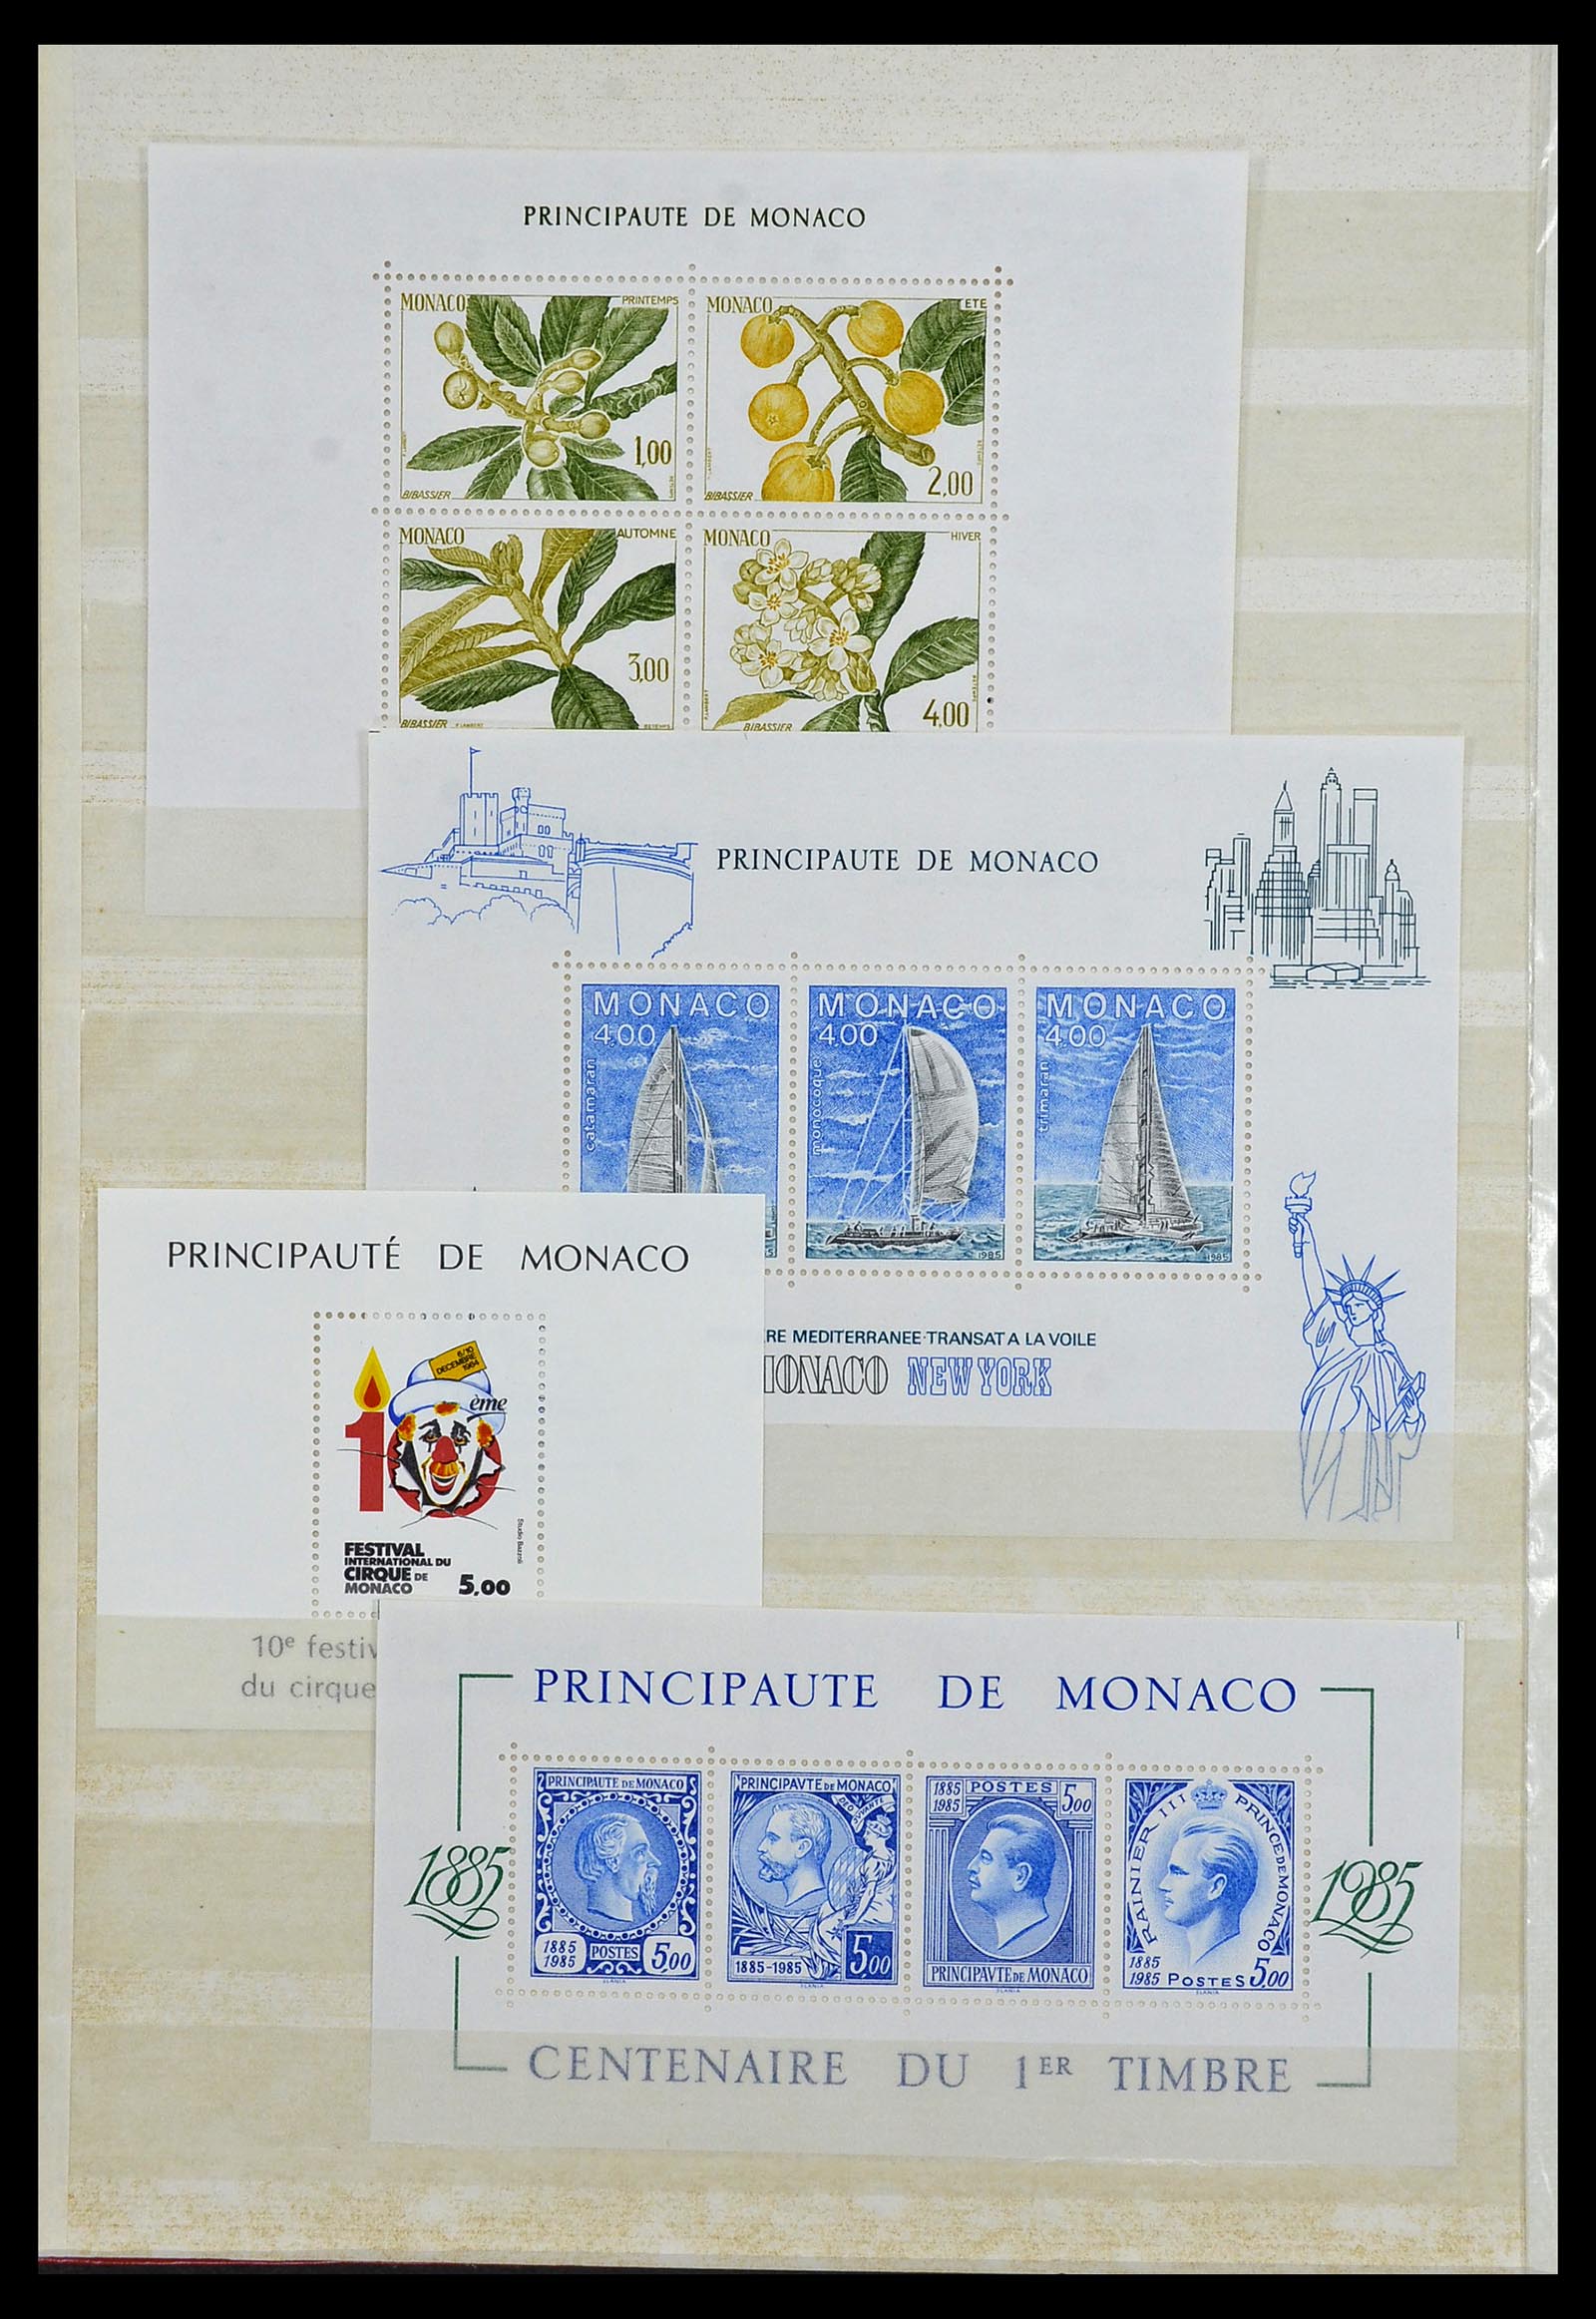 34045 006 - Stamp collection 34045 Western Europe souvenir sheets 1973-1986.